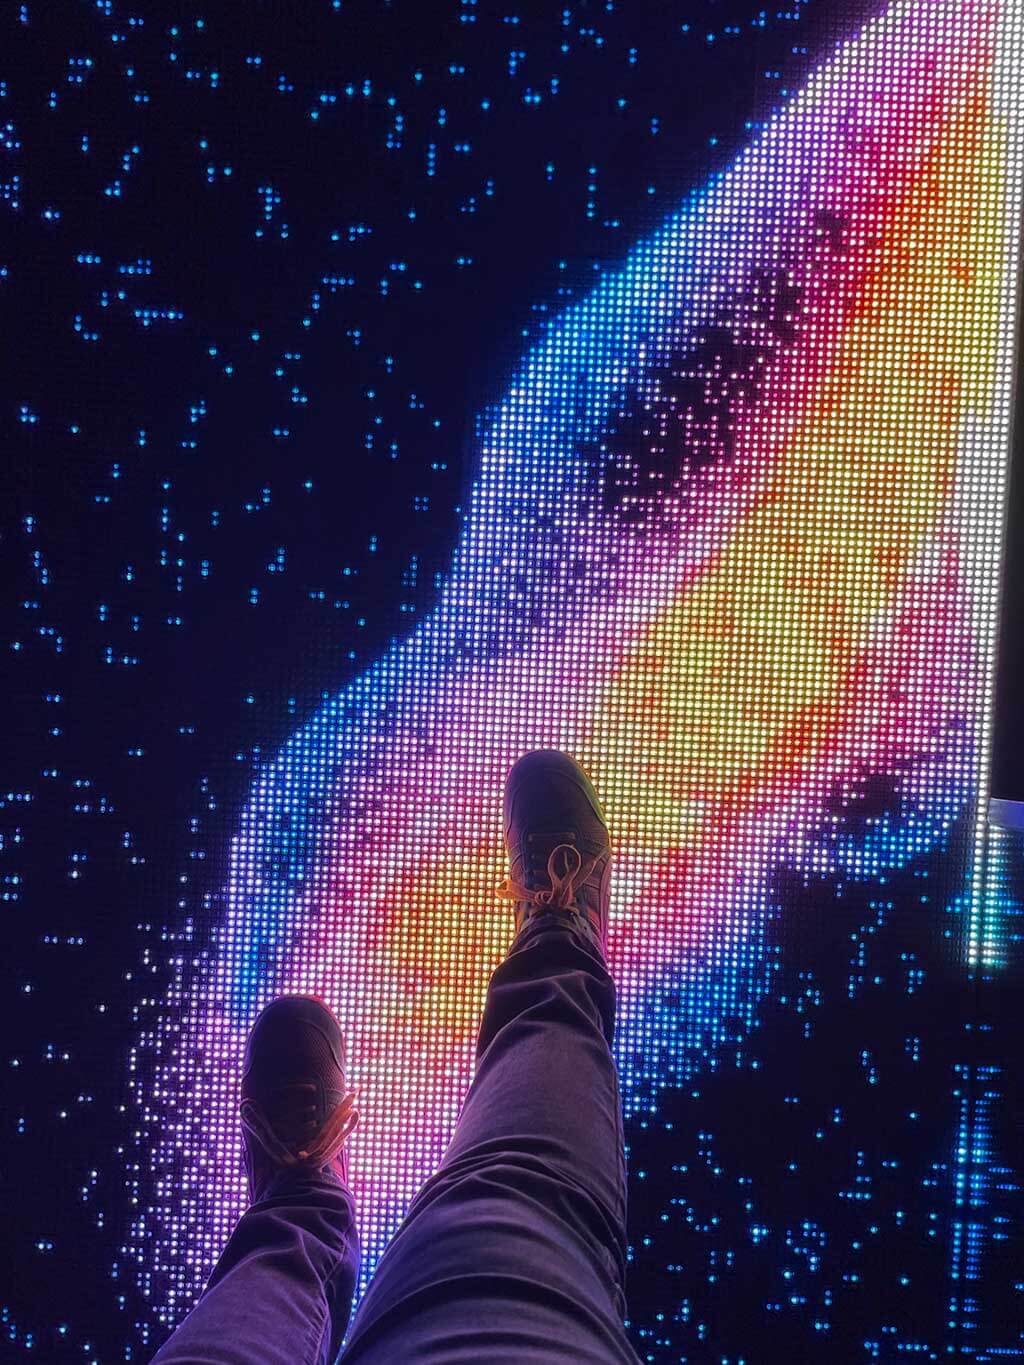 drive-swim-fly-chicago-illinois-wndr-museum-selfie-experience-family-fun-light-up-floor-psychedelic-jessica-wndr-light-floor-shoes